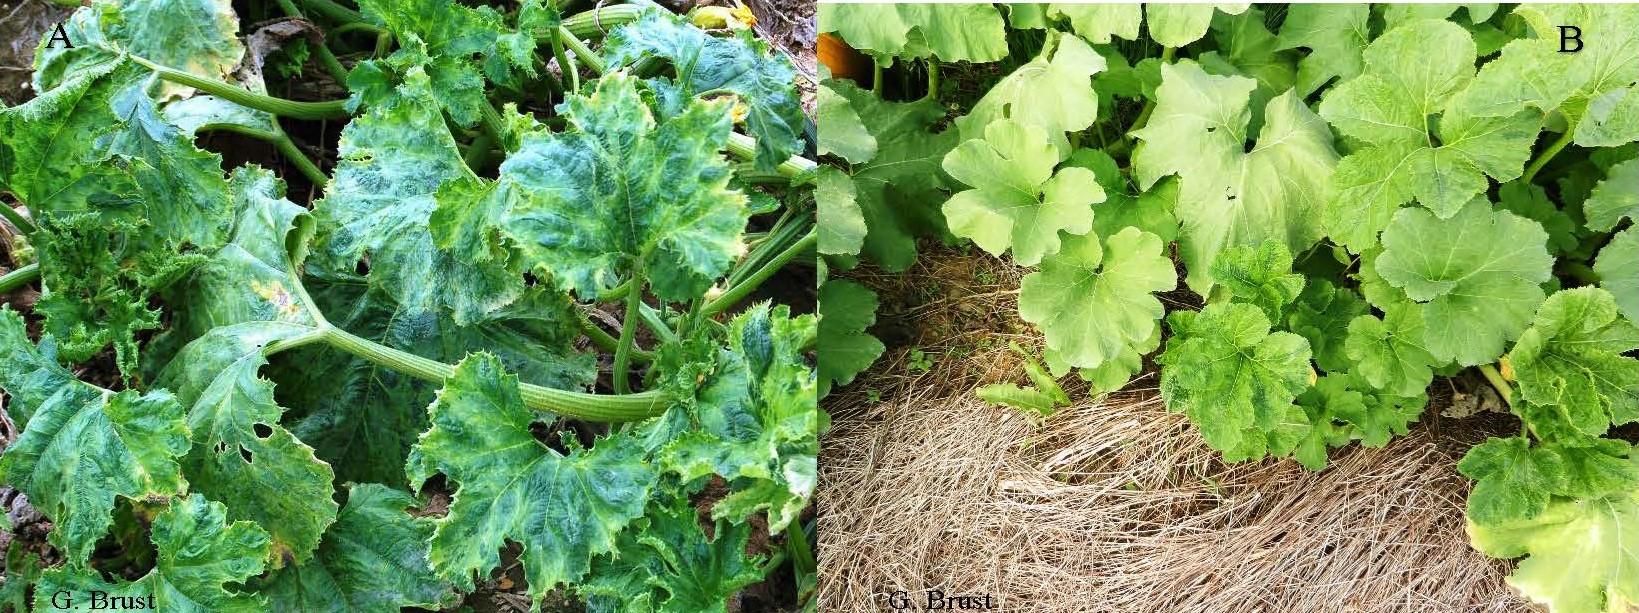 Virus symptoms on plants can be more severe (A) or milder (B)